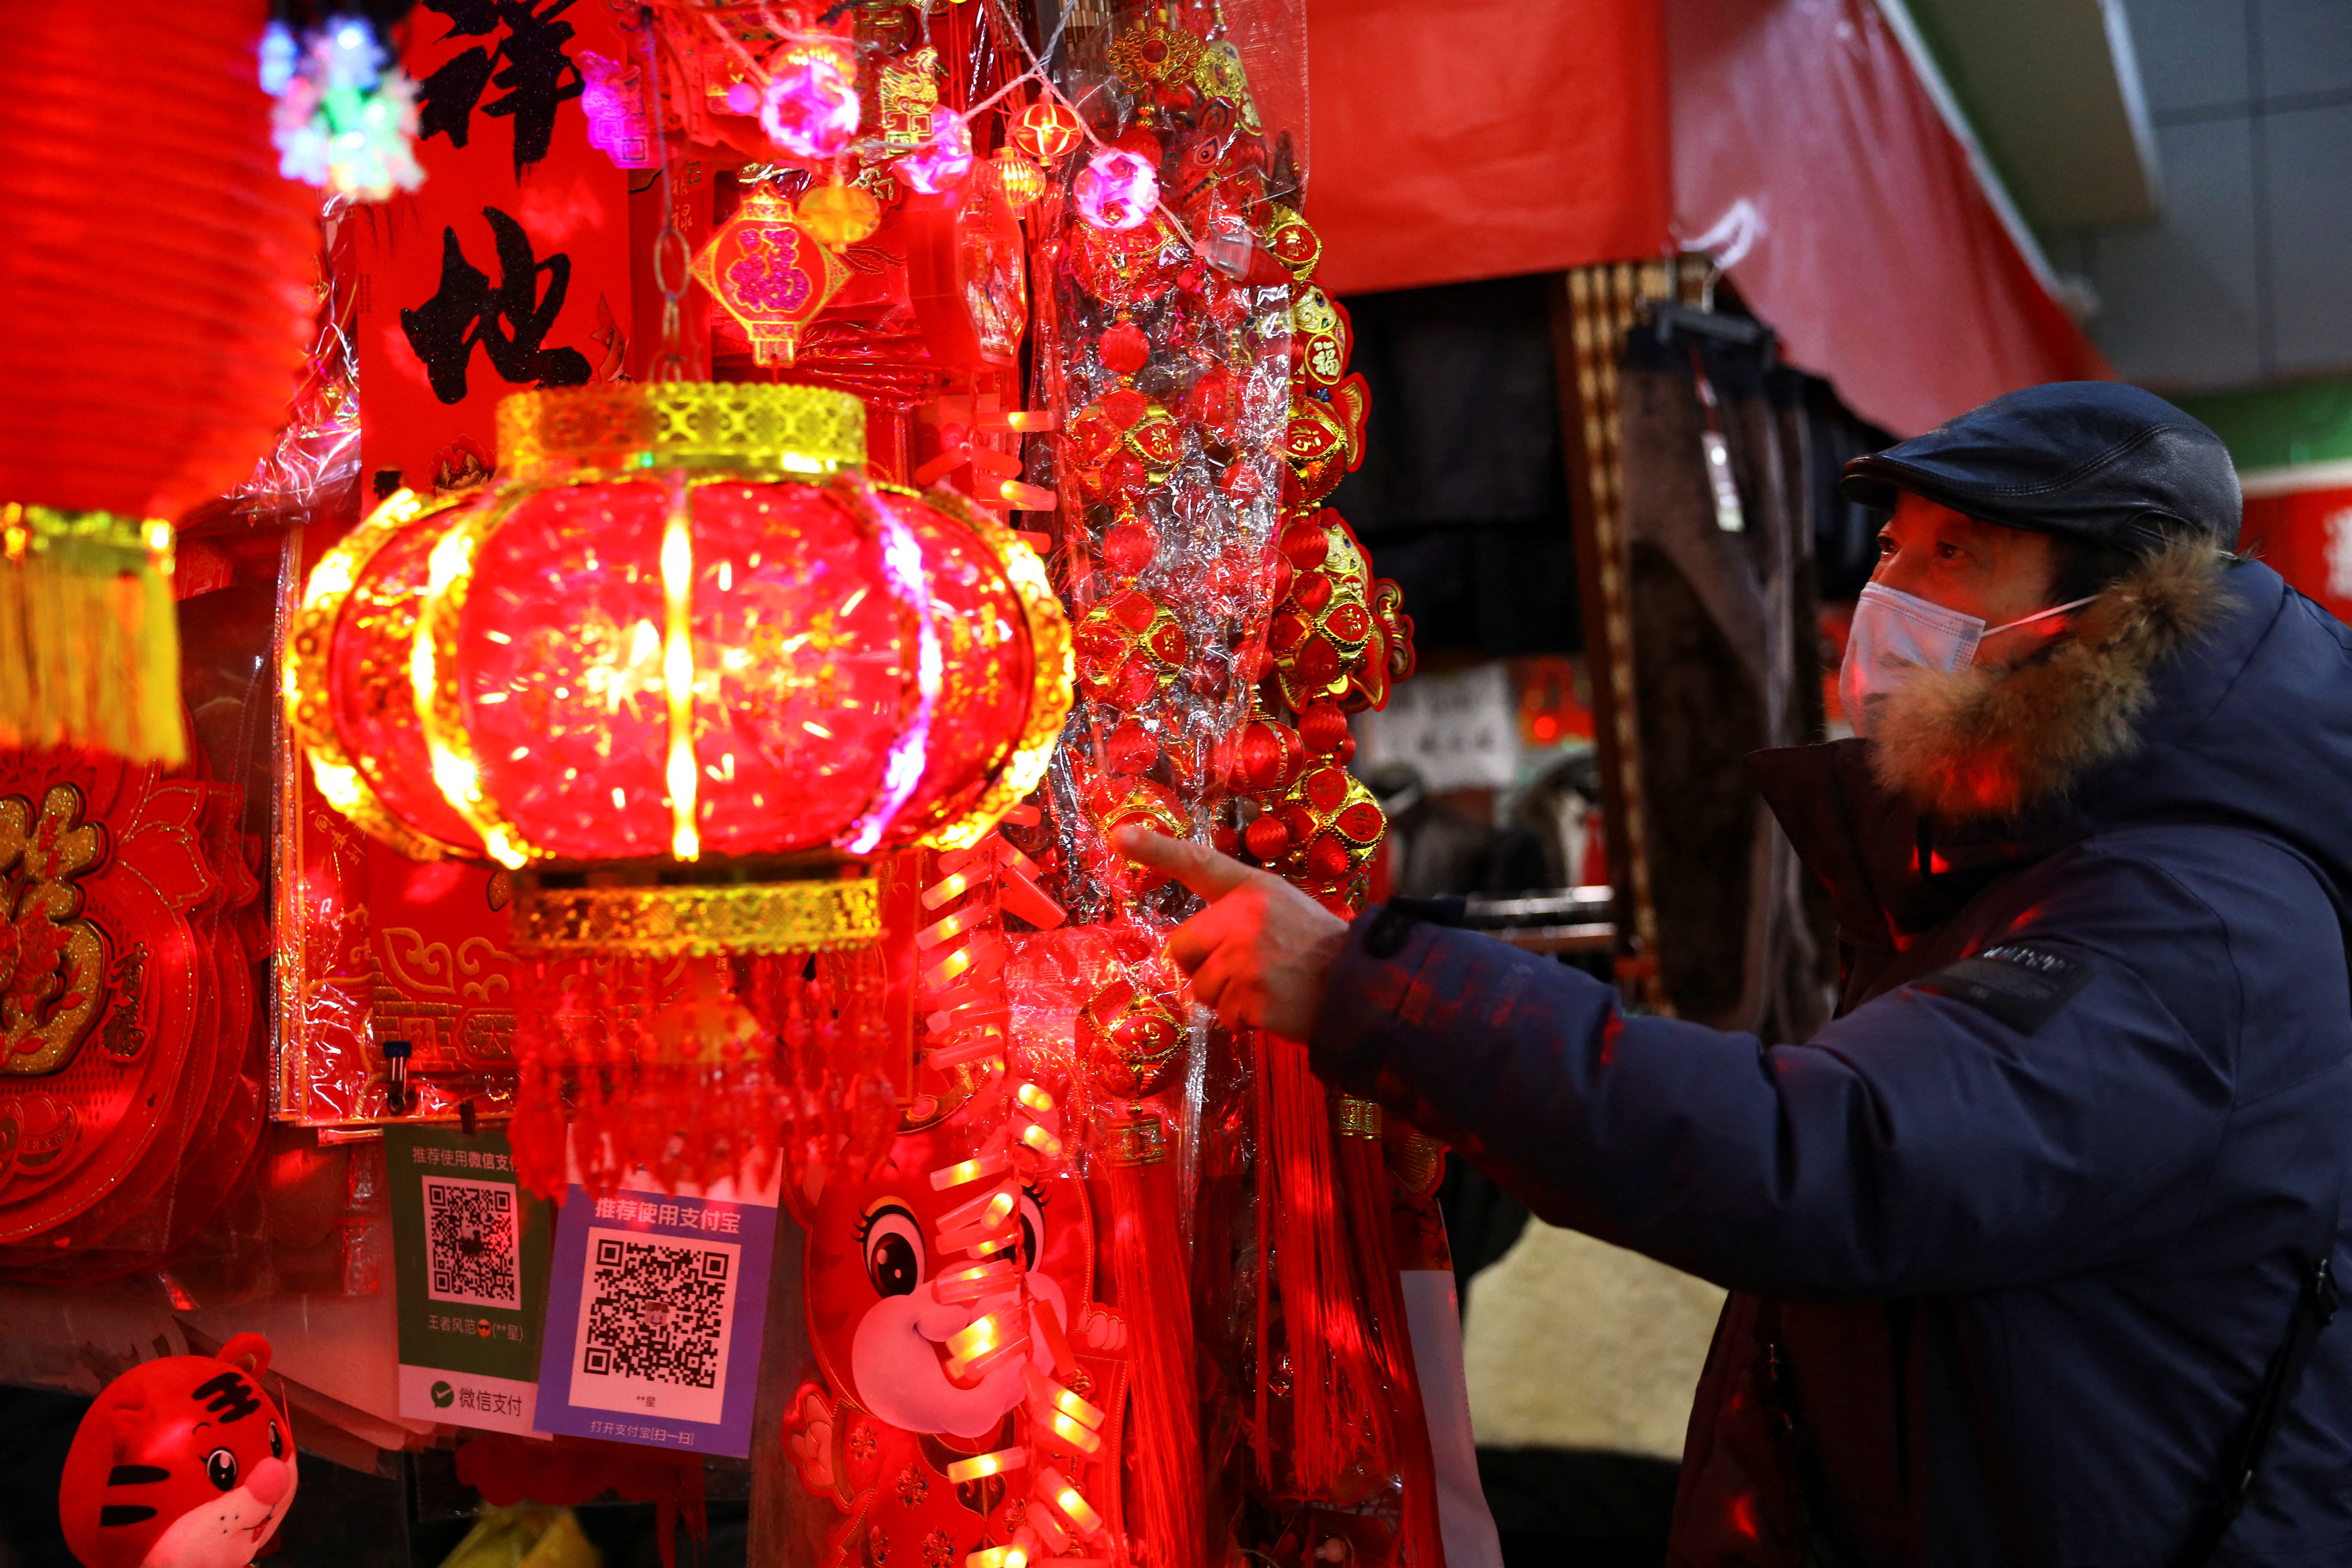 A customer looks at decorations for Chinese Lunar New Year displayed at a stall inside a morning market in Beijing